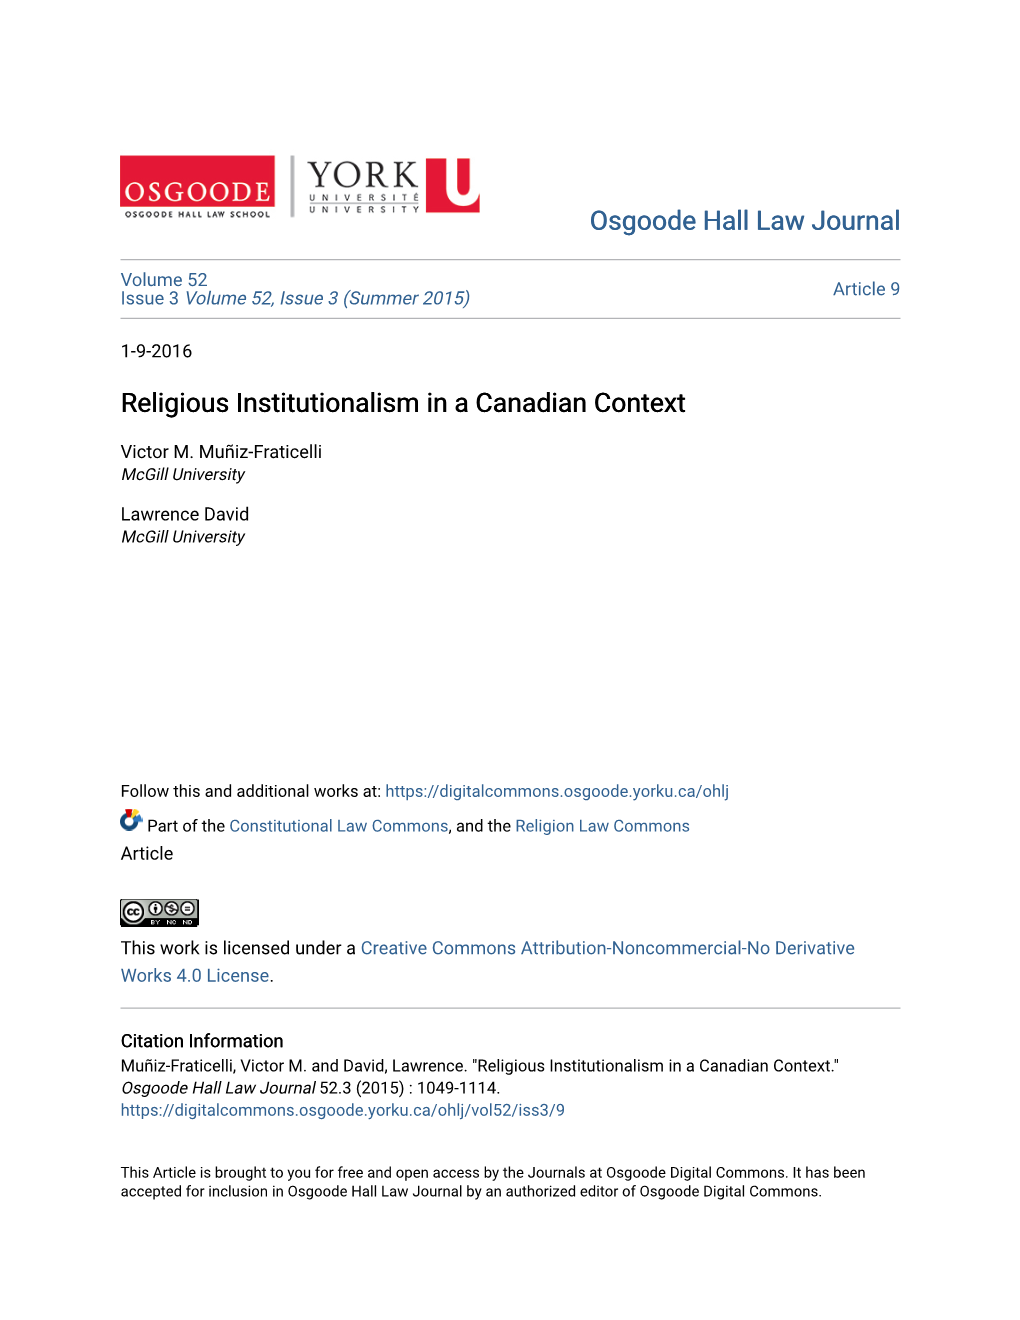 Religious Institutionalism in a Canadian Context